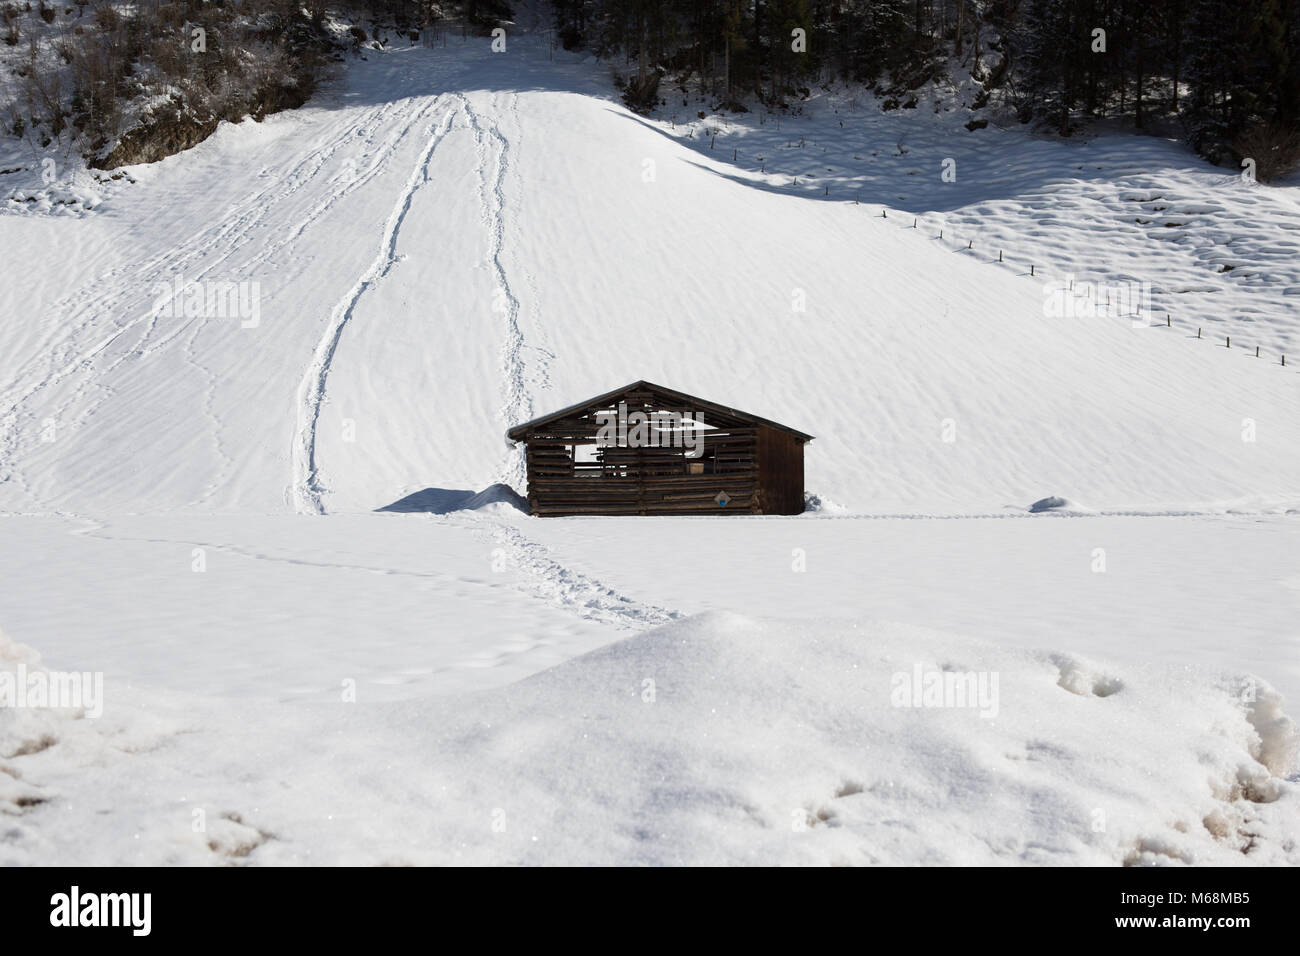 Europe Austria Alps Großarl -a hut in the mountains with snow Stock Photo